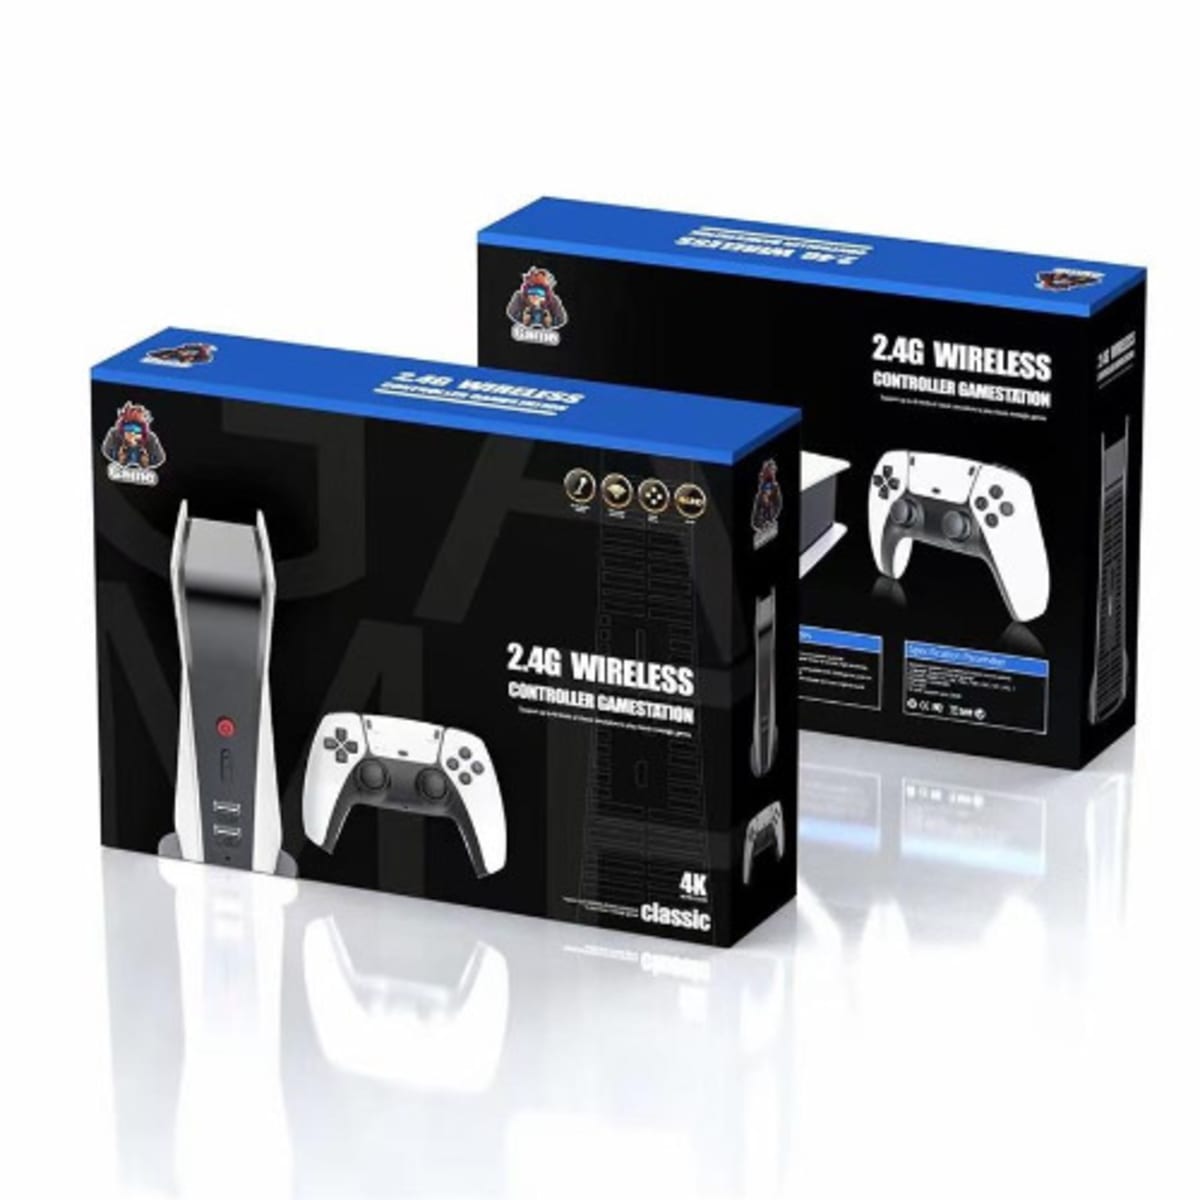 Game 2.4g Double Wireless Controller Game Stick 4k Hd Classic 64gb